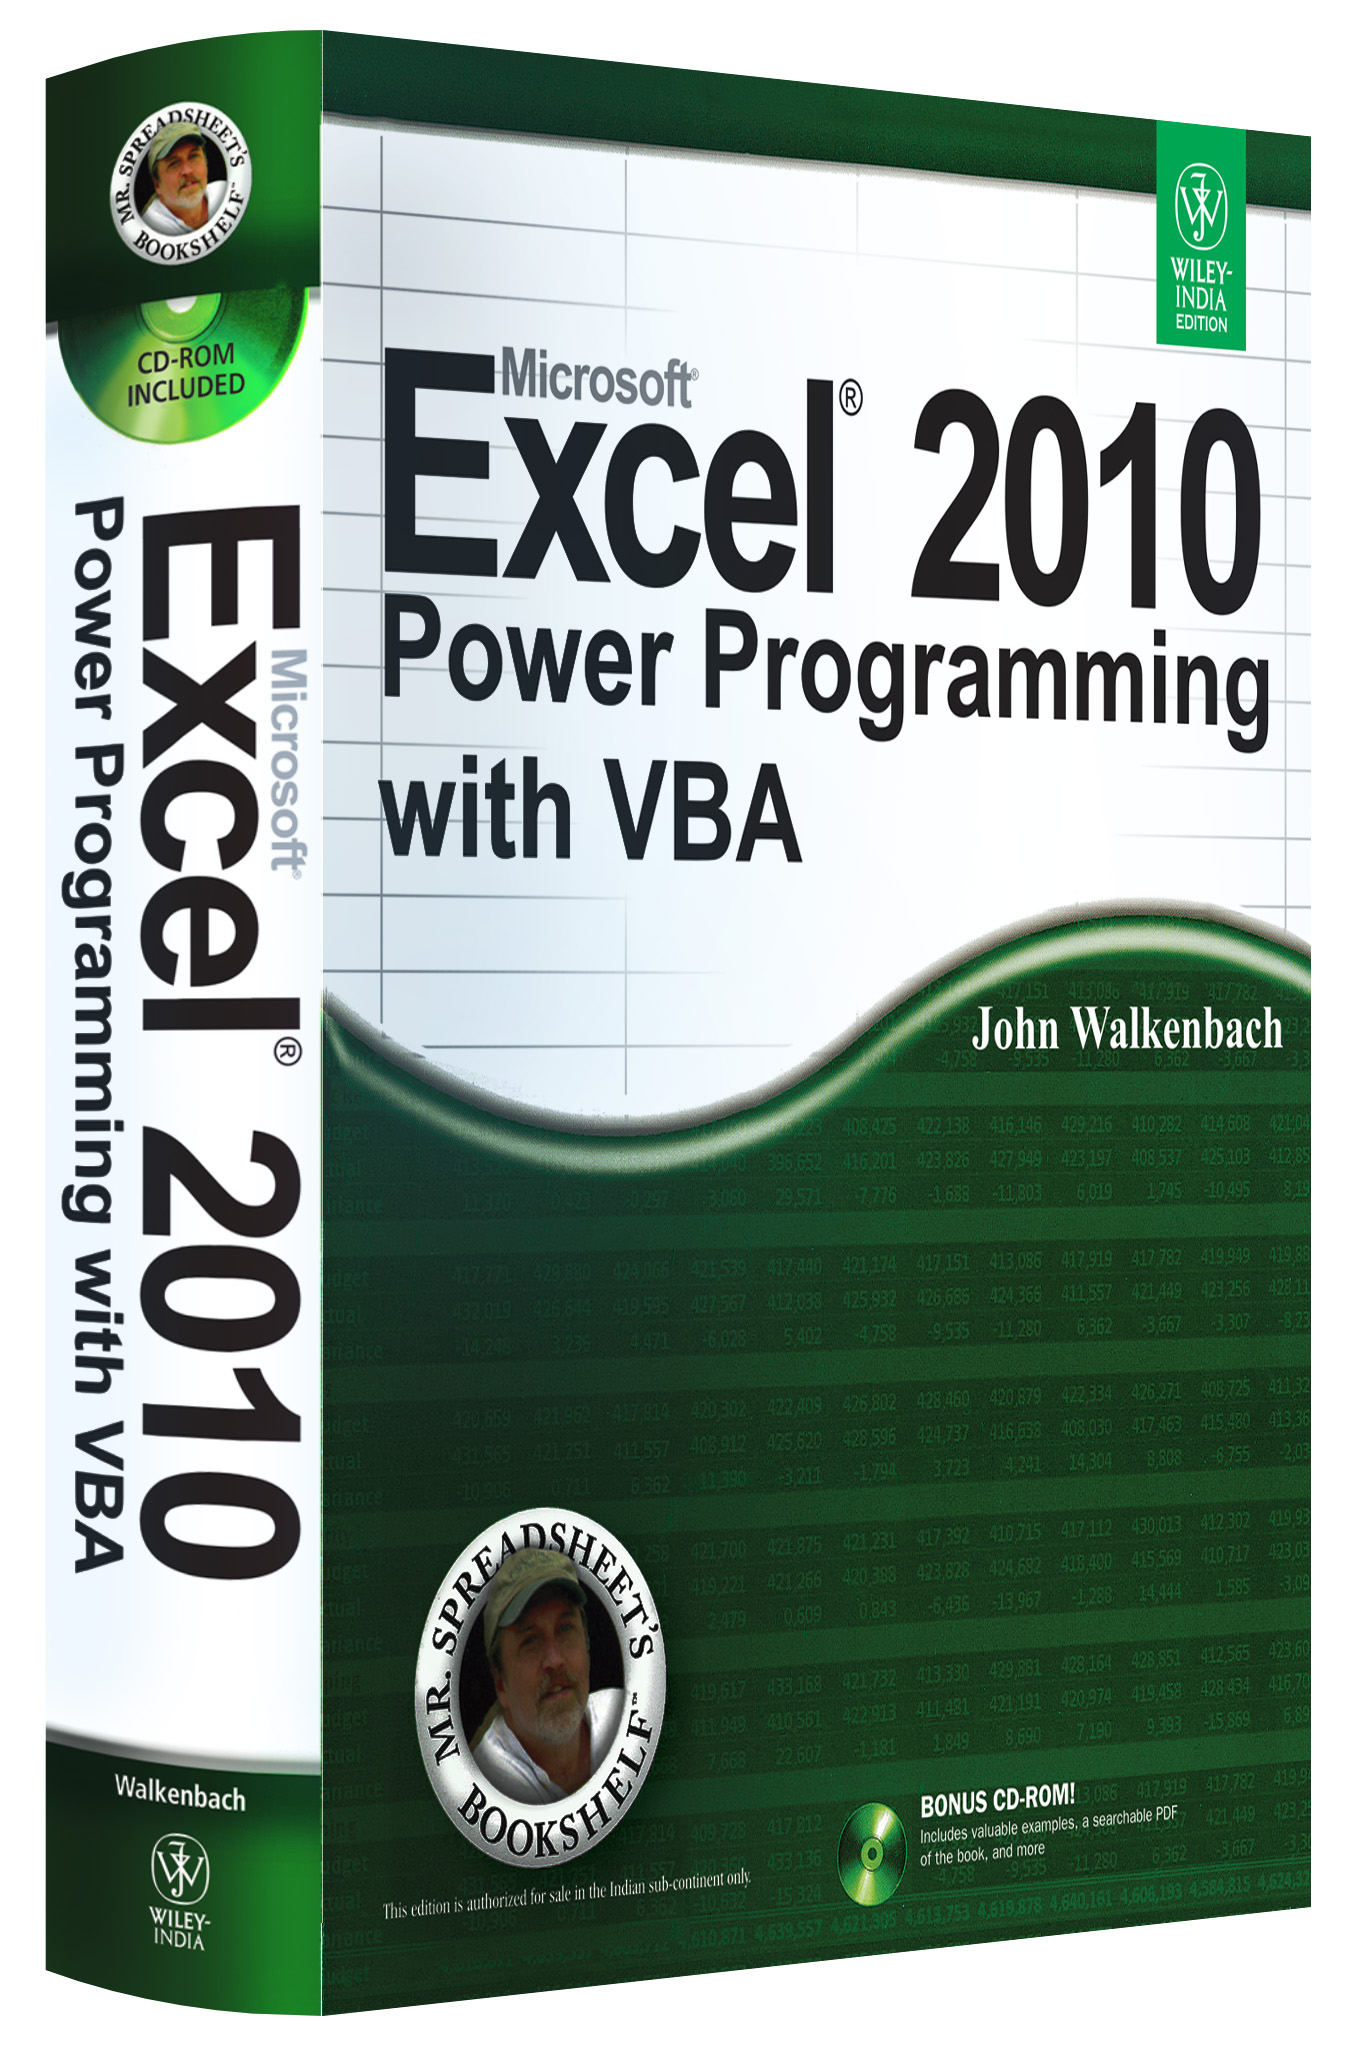 Microsoft excel 2010 power user test answers